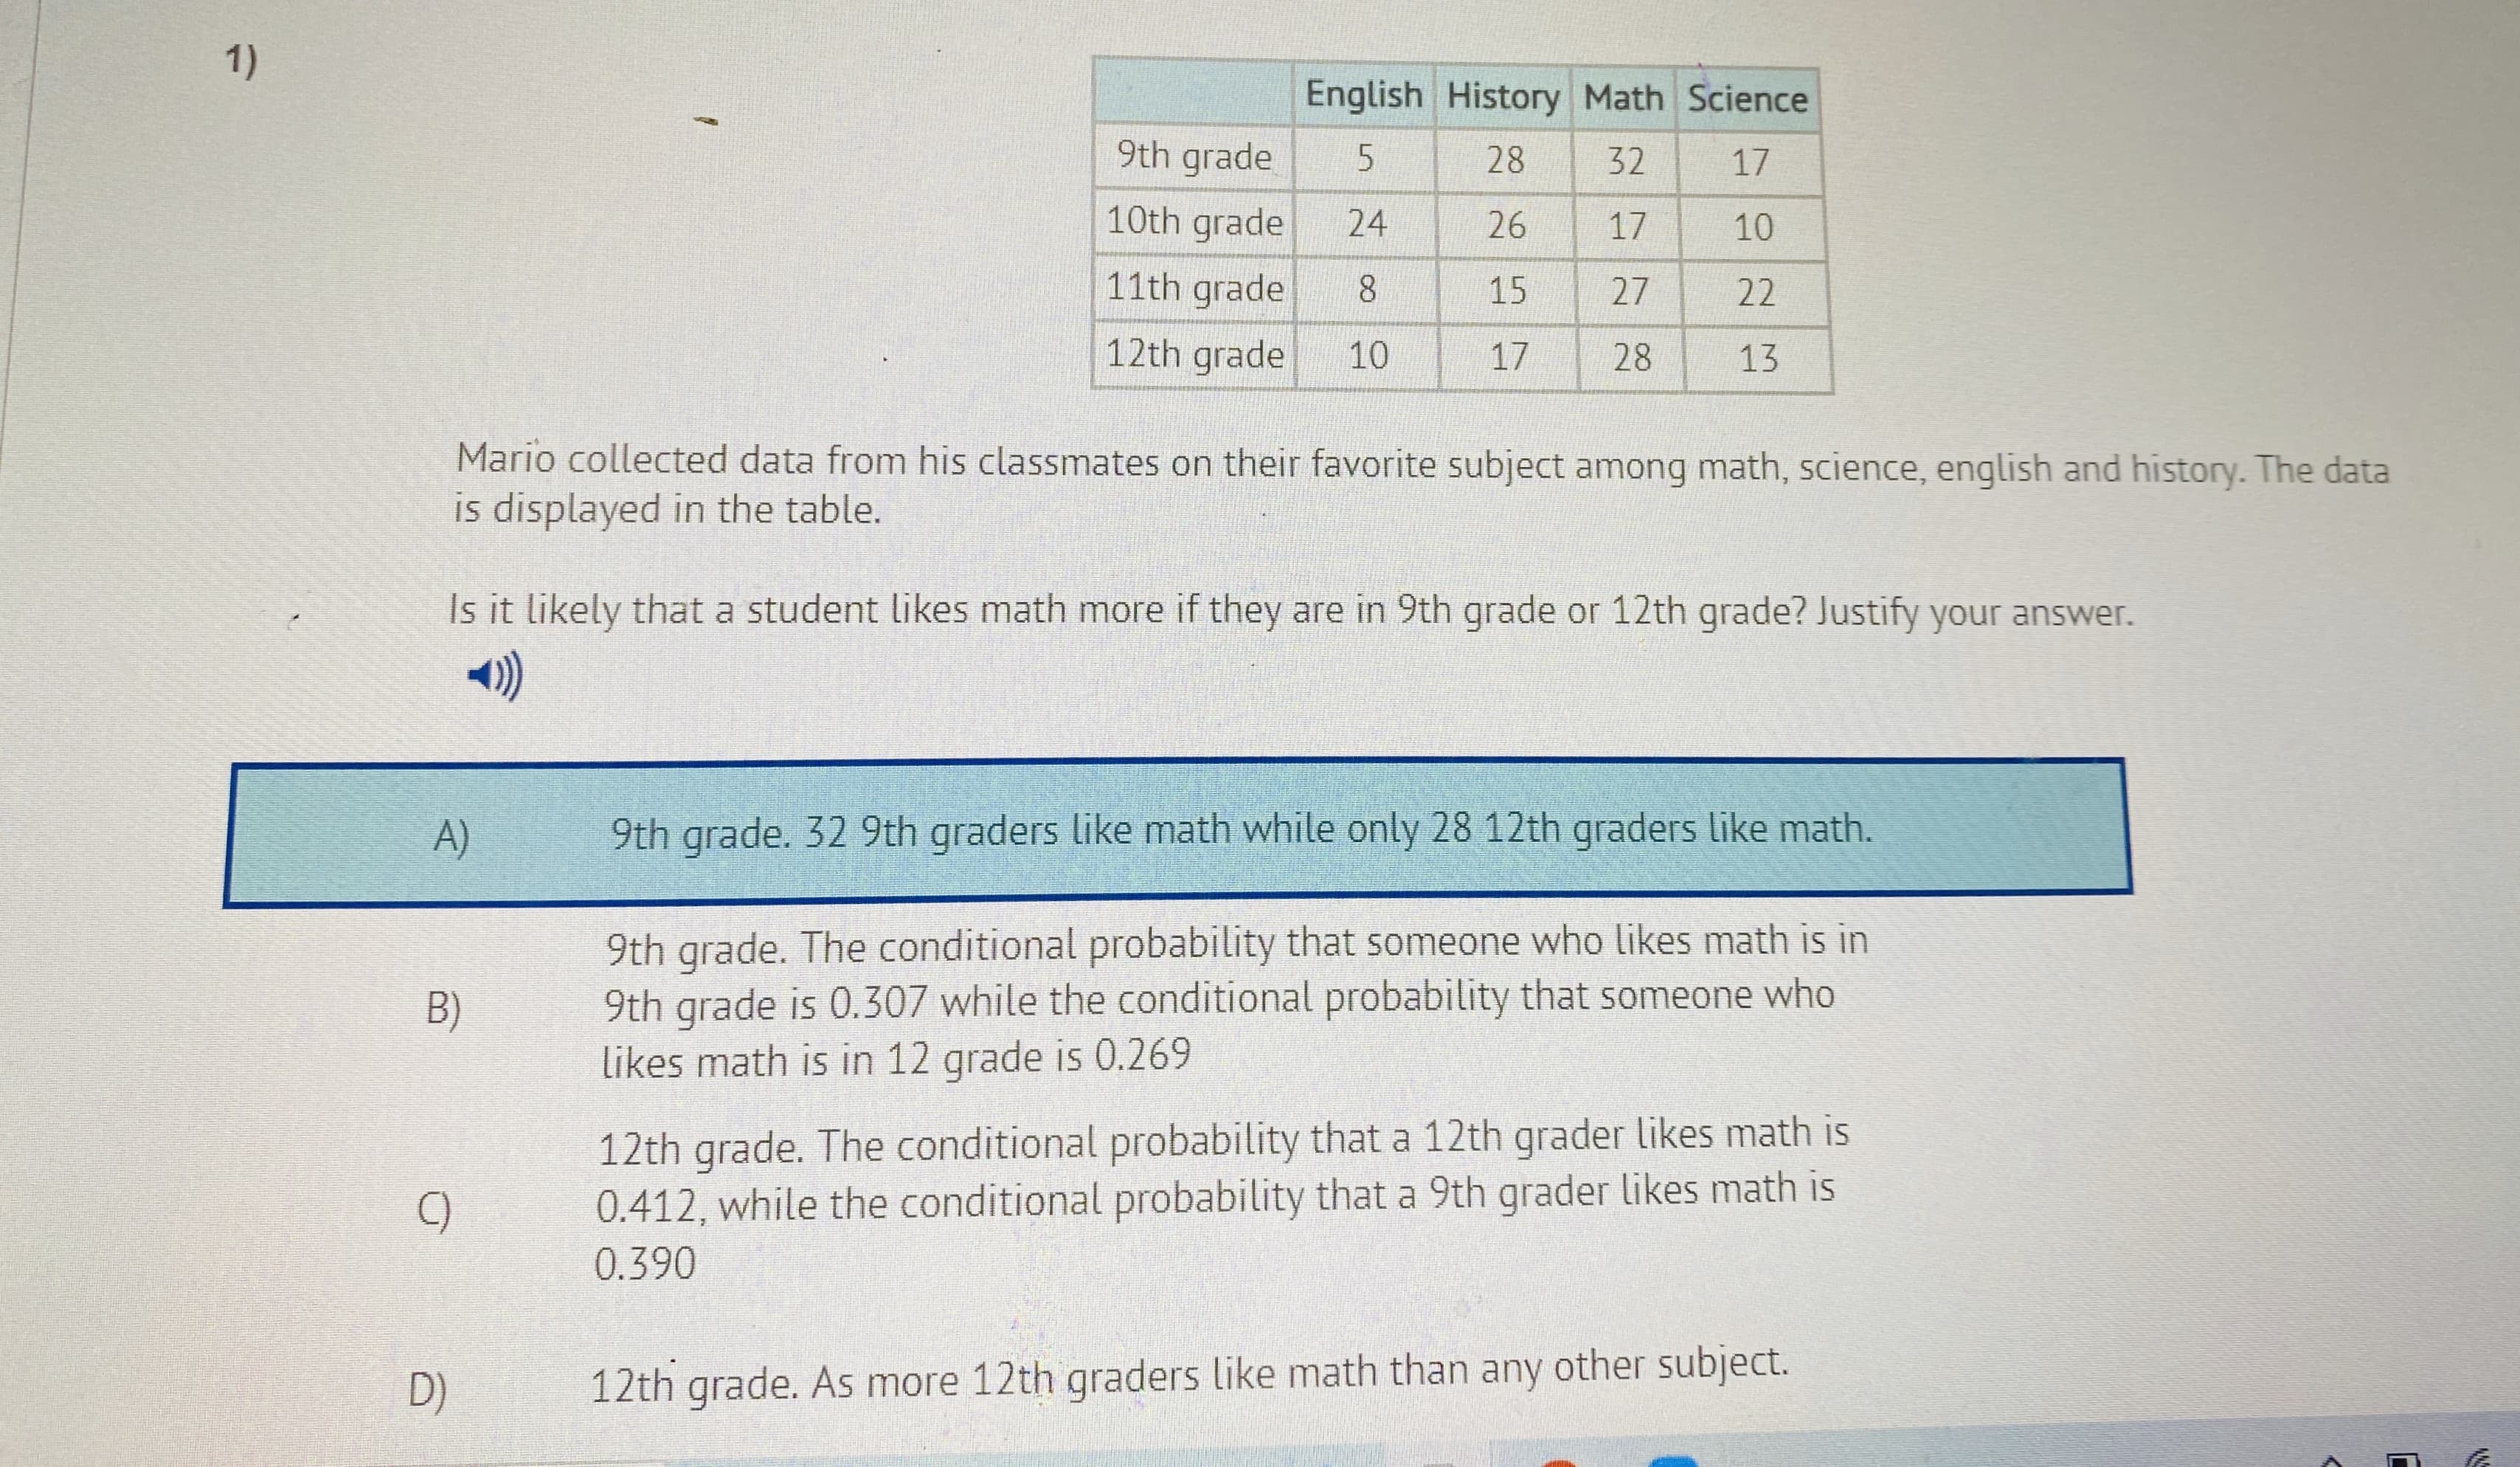 Mario collected data from his classmates on their favorite subject among math, science, english and history. The data
is displayed in the table.
Is it likely that a student likes math more if they are in 9th grade or 12th grade? Justify your answer.
